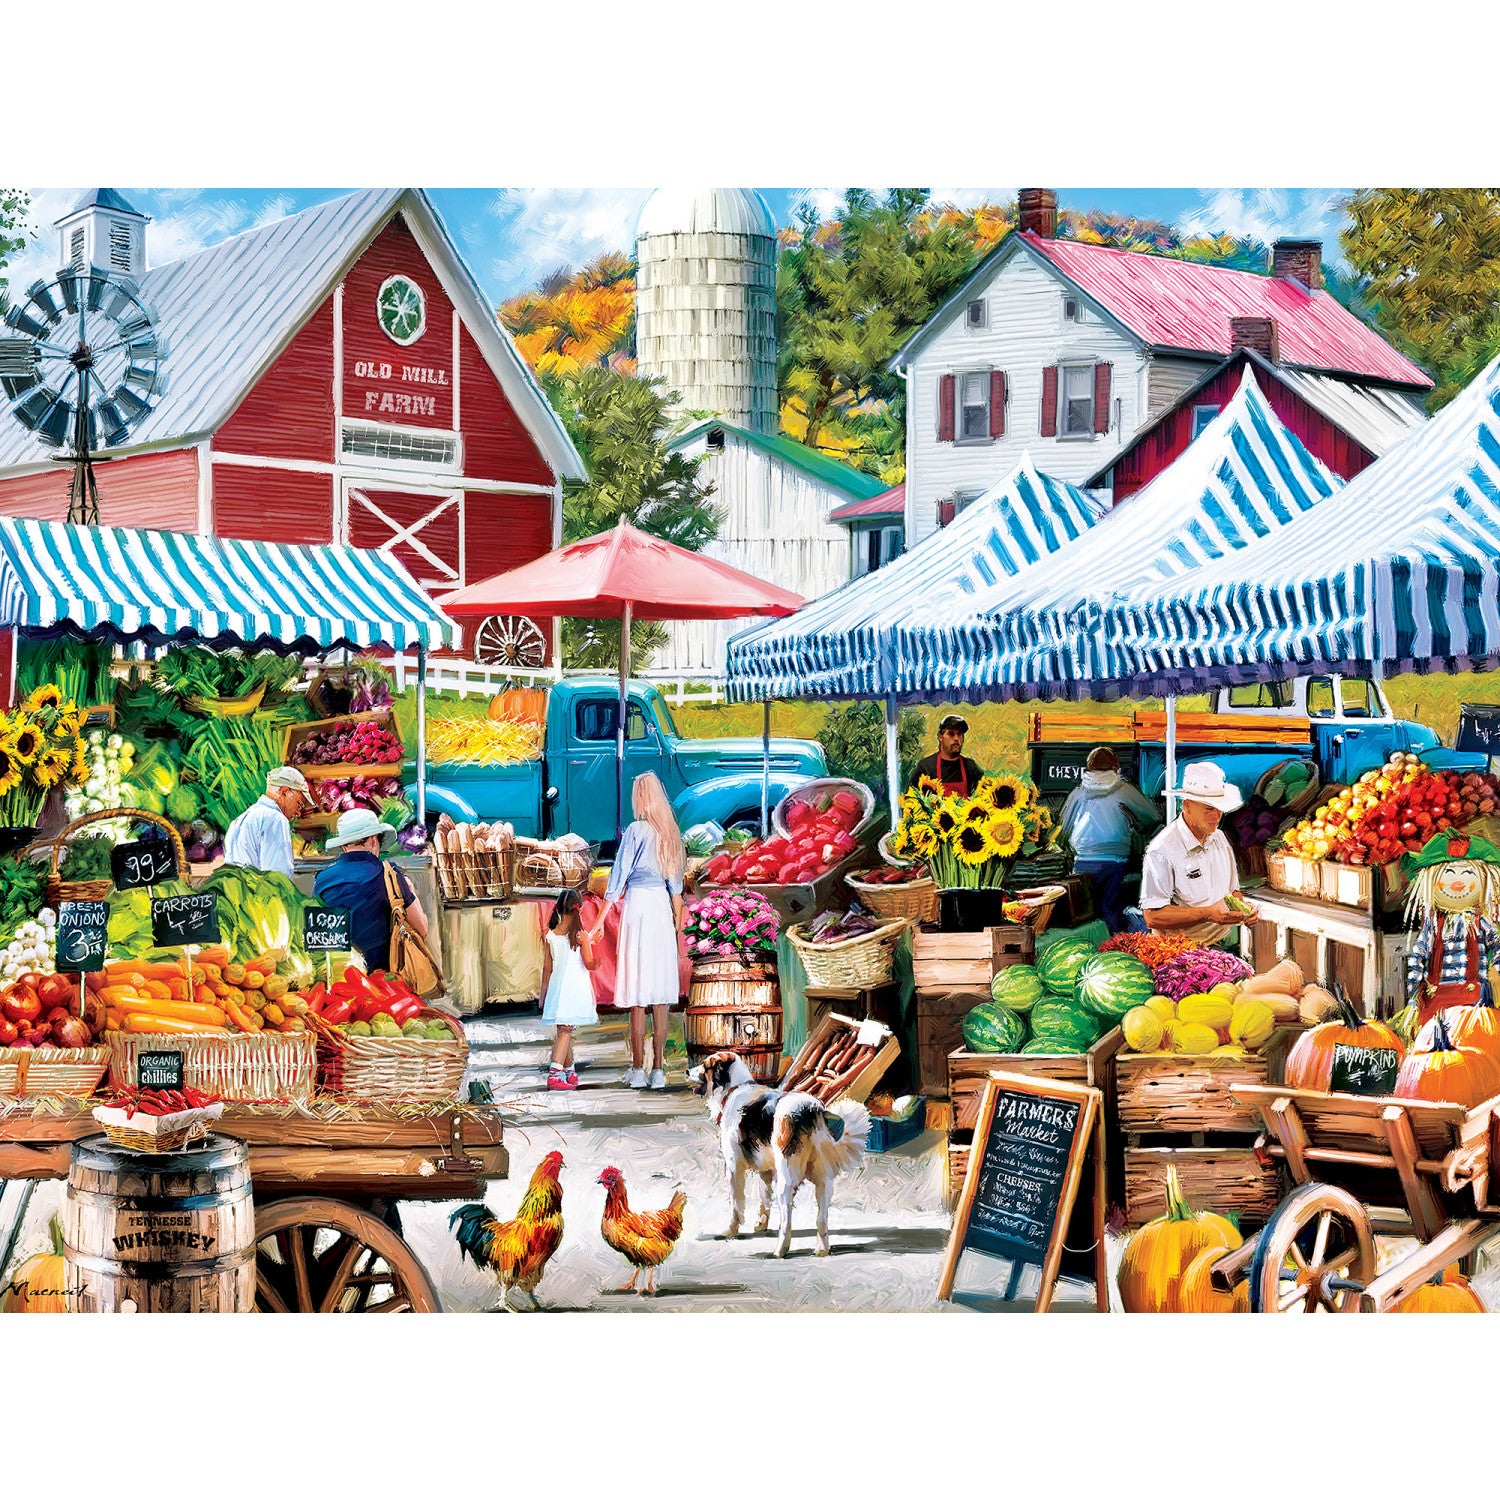 Farmer's Market - Old Mill Farm Stand 750 Piece Puzzle